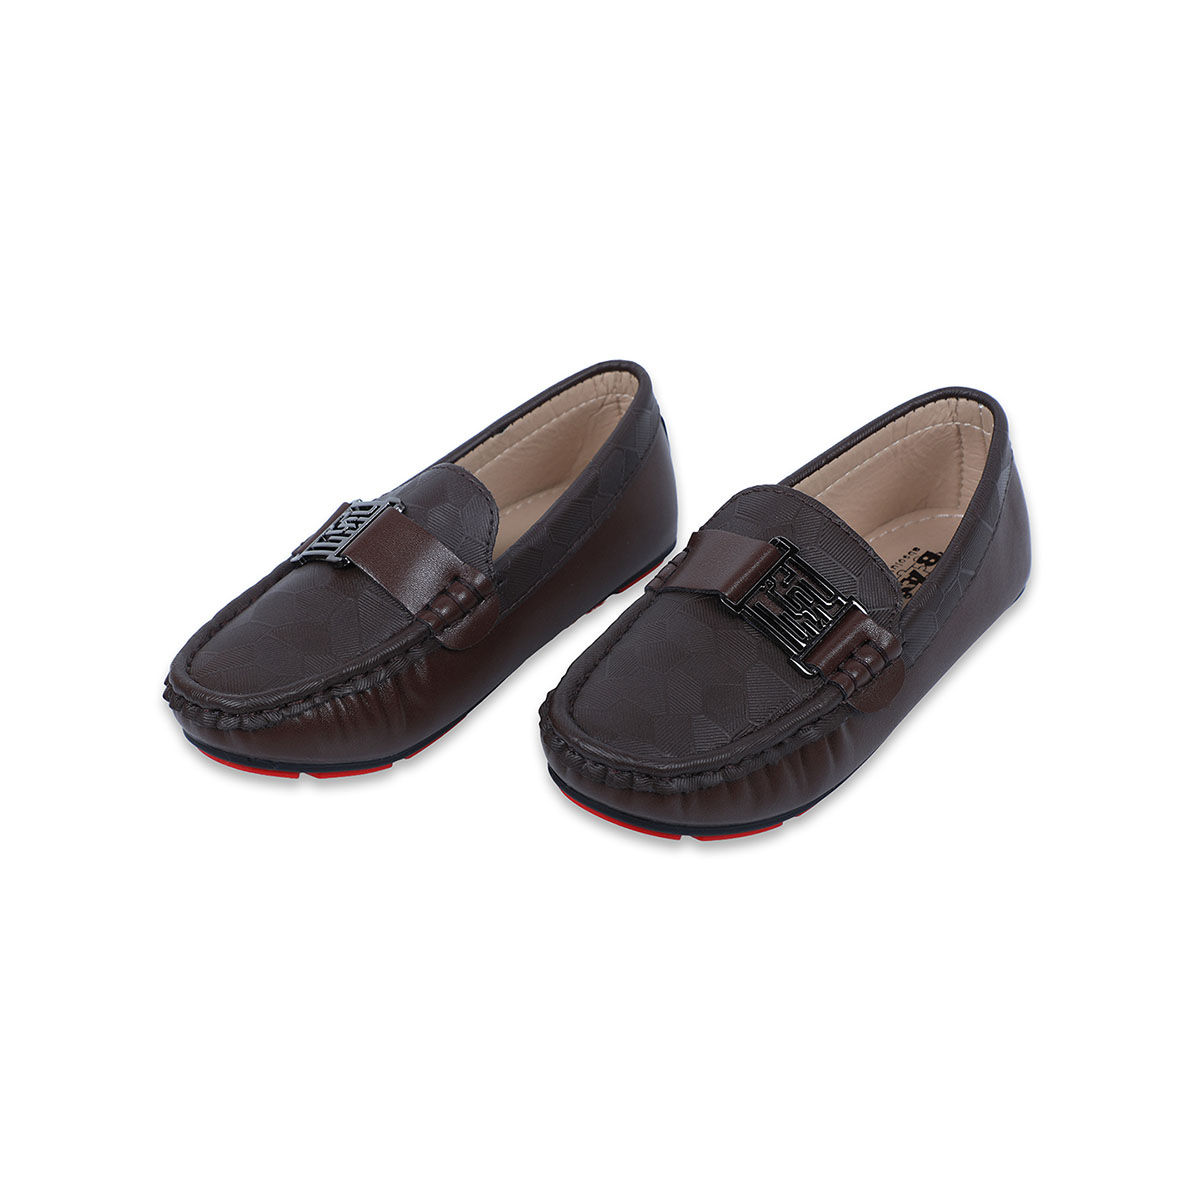 LAVRA Women's Faux Leather Loafers Casual Slip On Moccasin Shoes -  Walmart.com